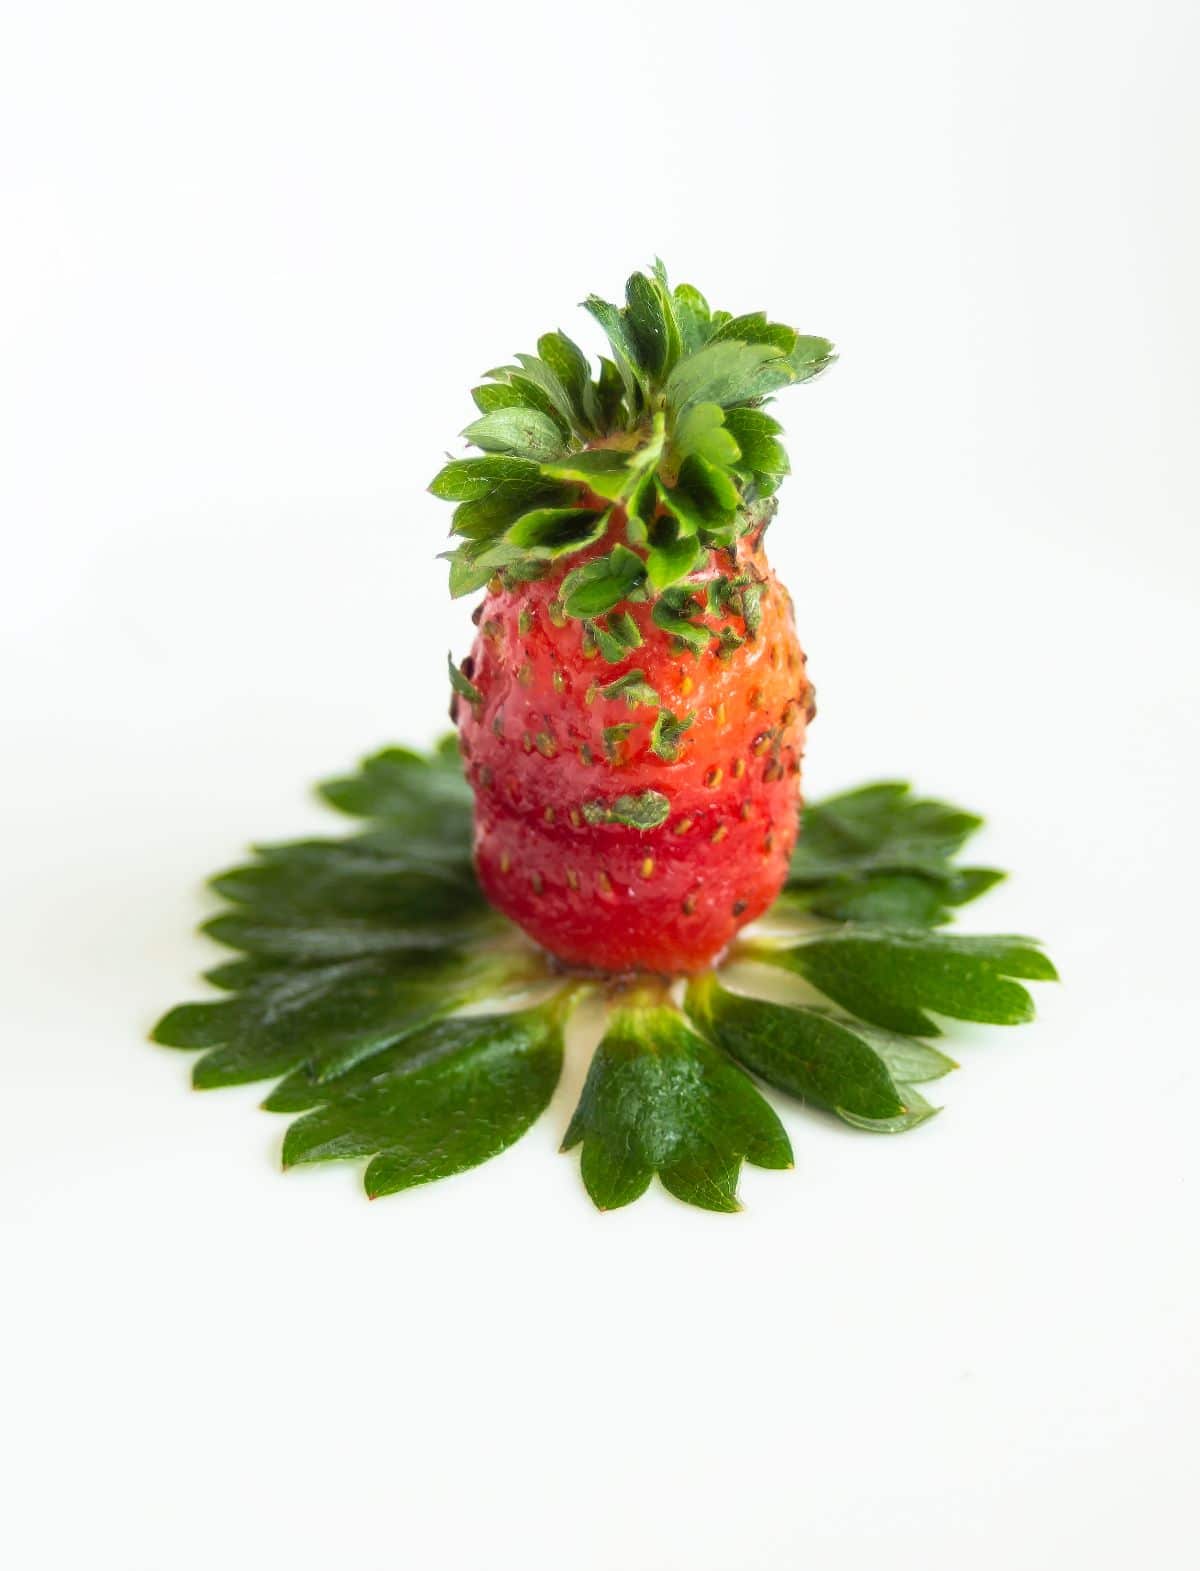 Strawberry sprouting from seeds and  green leaves around on white background